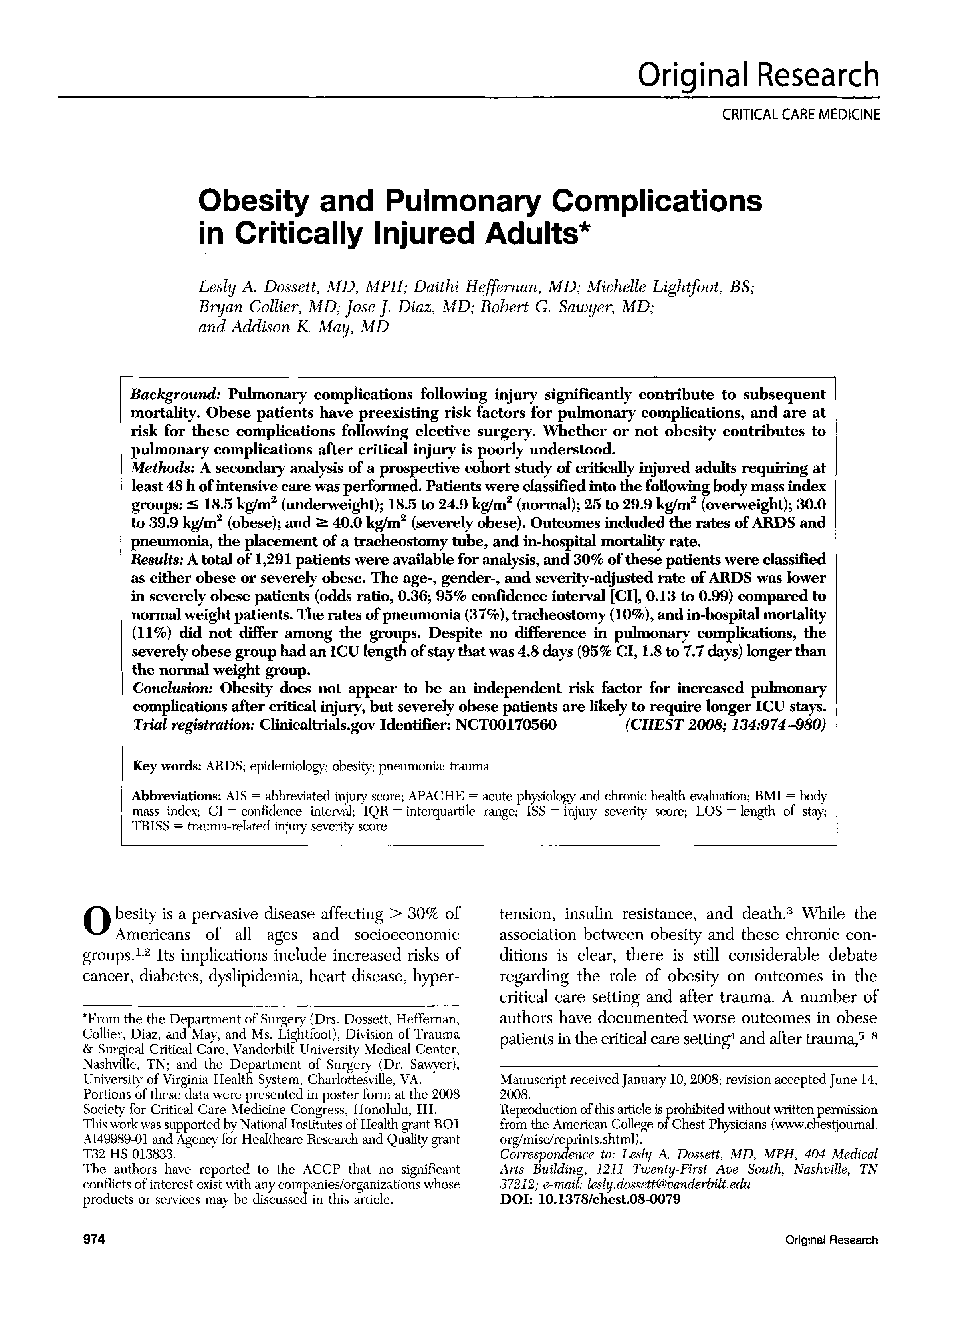 Obesity and Pulmonary Complications in Critically Injured Adults